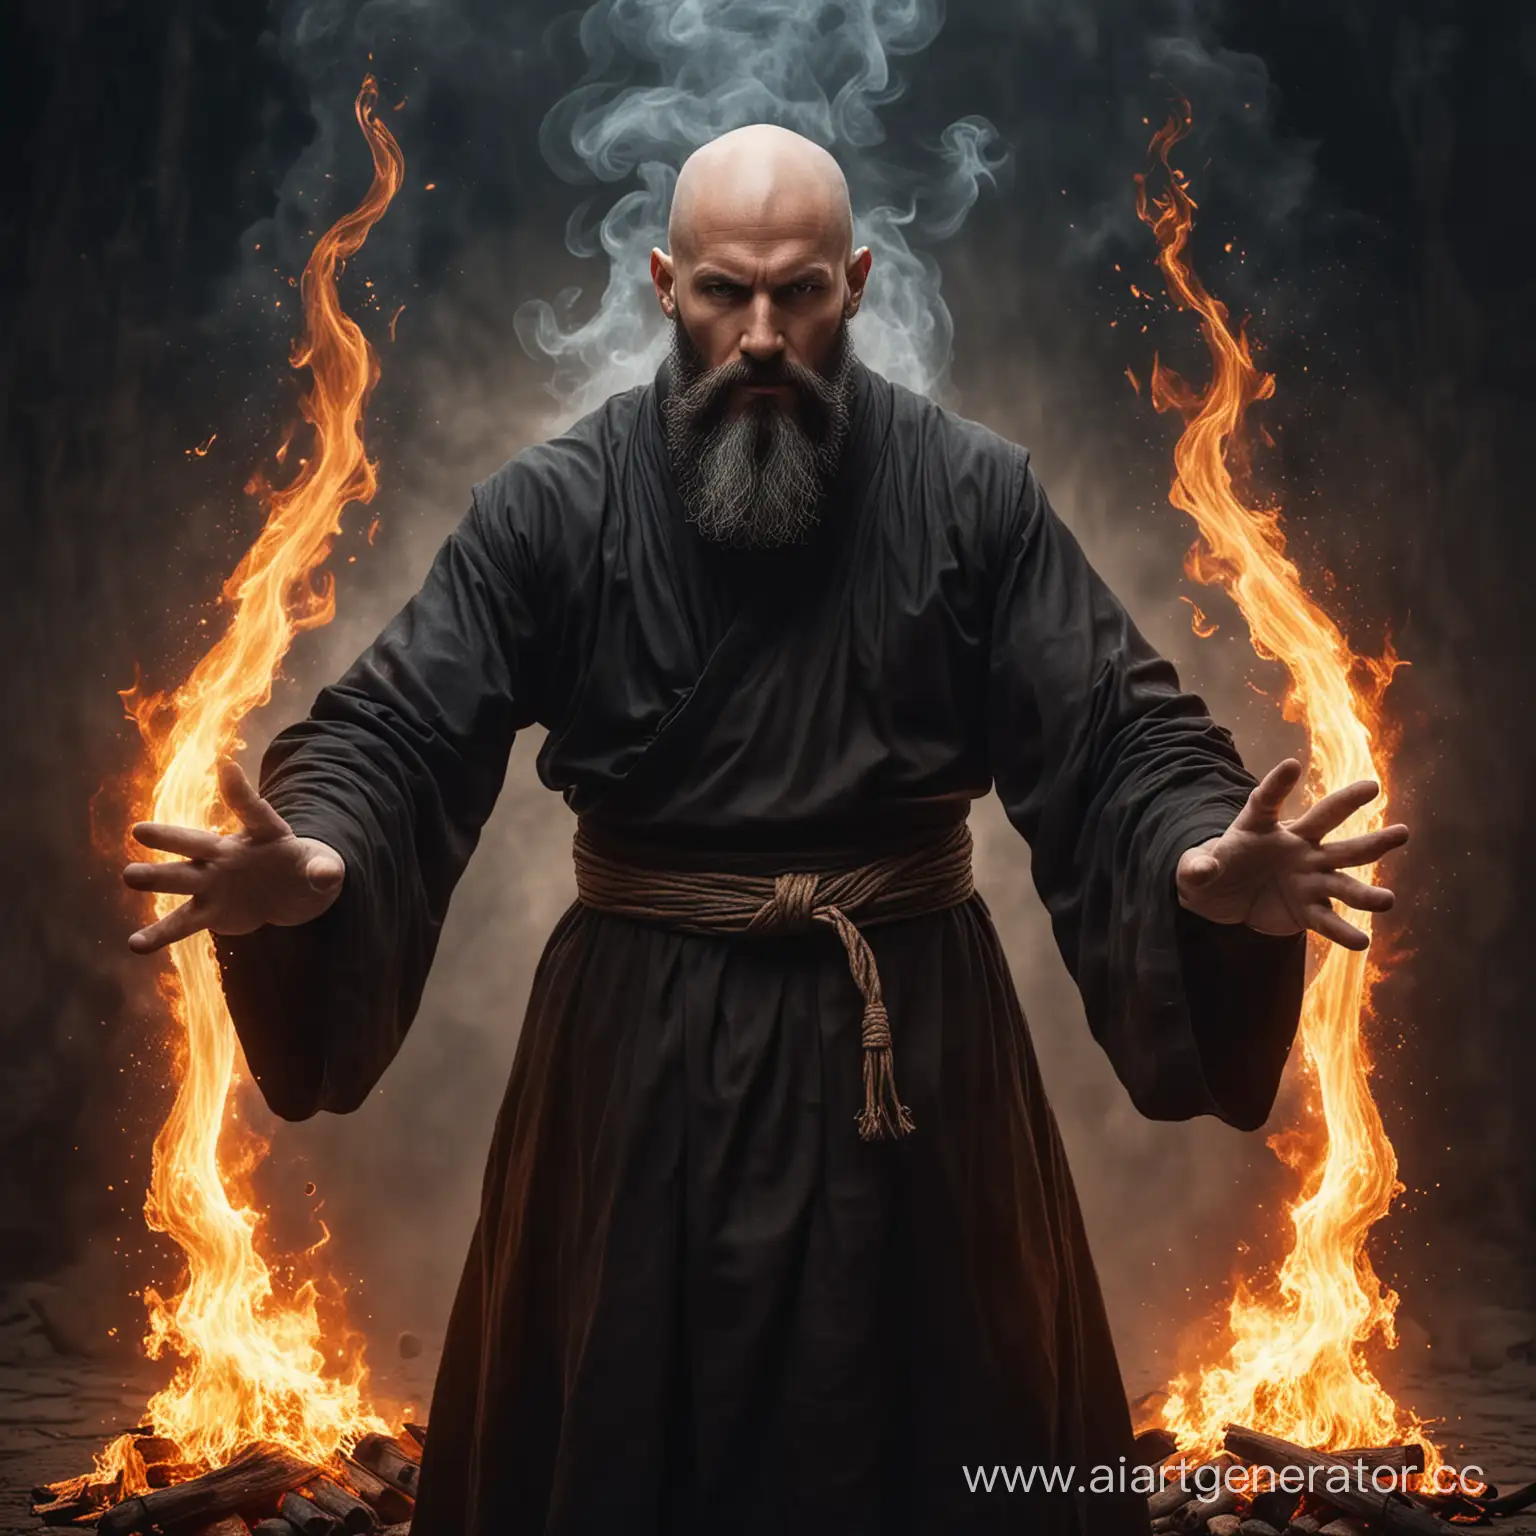 Elderly-Fire-Mage-Powerful-Wizardry-in-Fantasy-Realm